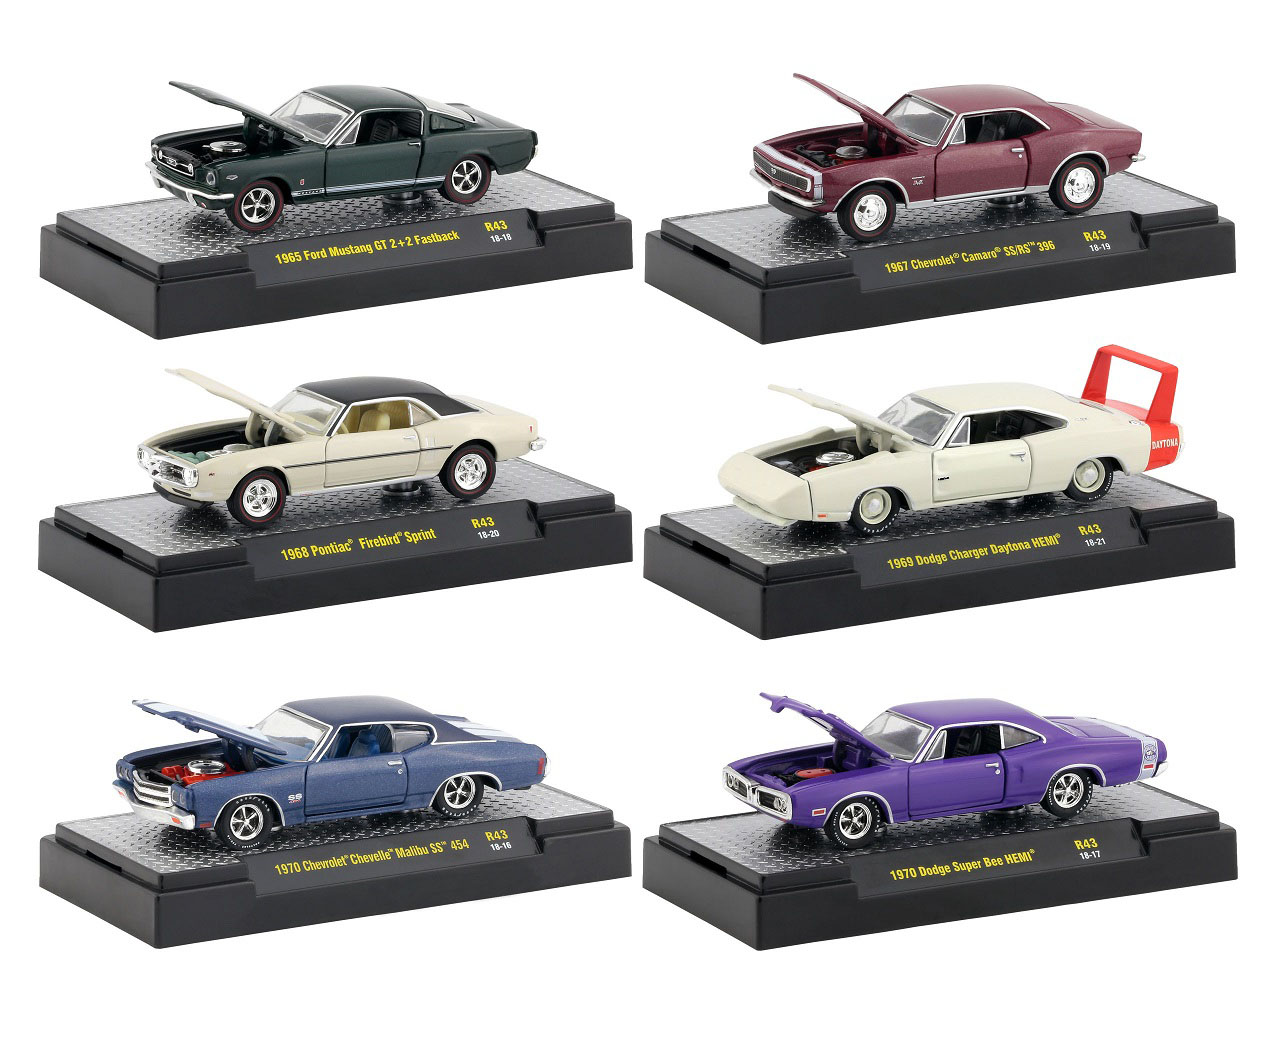 Detroit Muscle 6 Cars Set Release 43 In Display Cases 1/64 Diecast Model Cars By M2 Machines